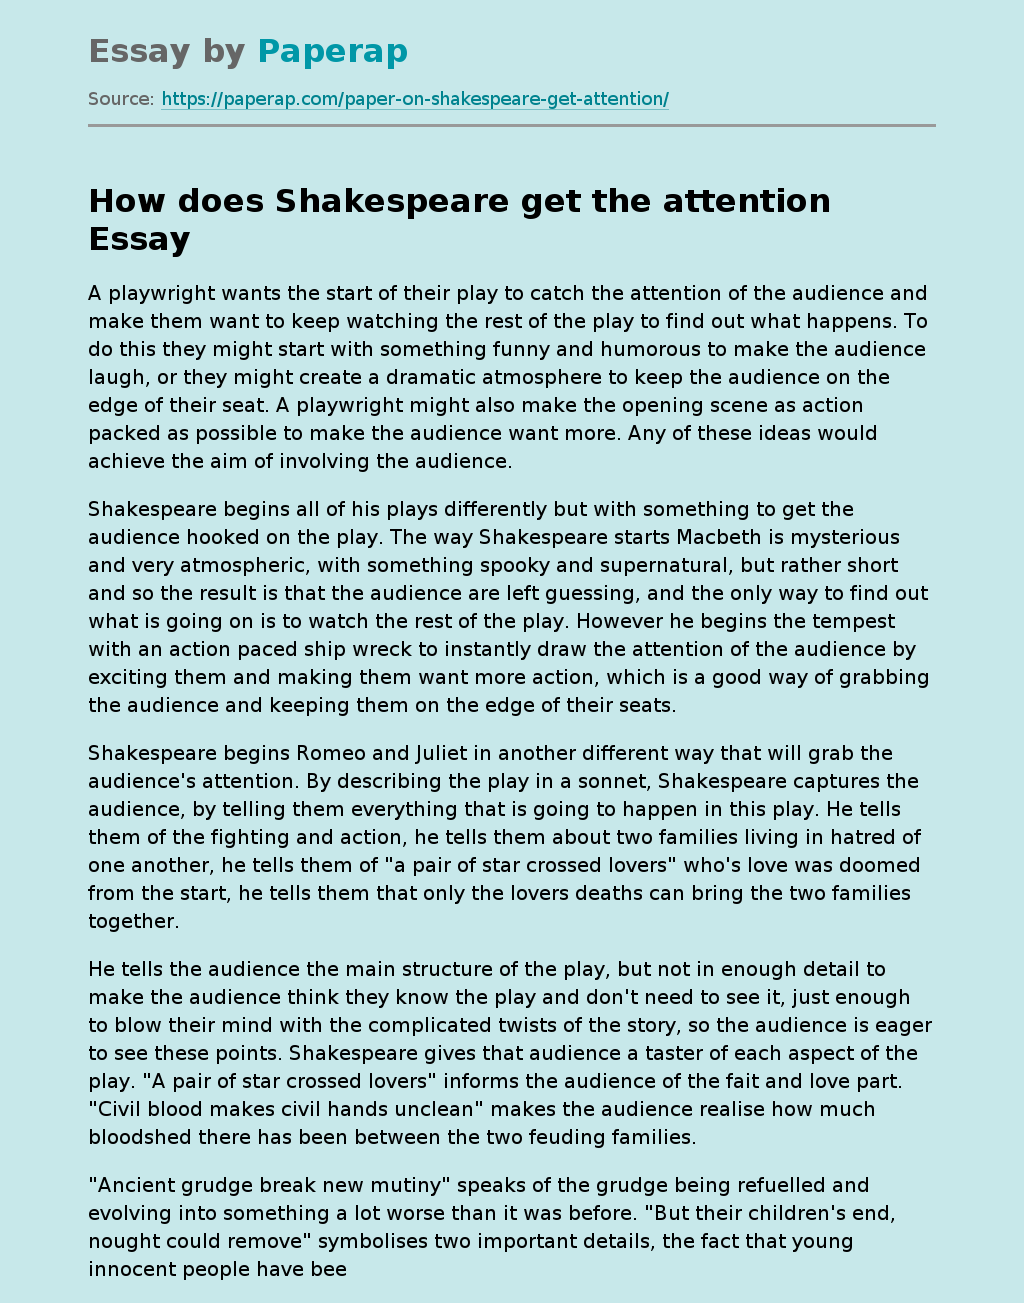 How does Shakespeare get the attention